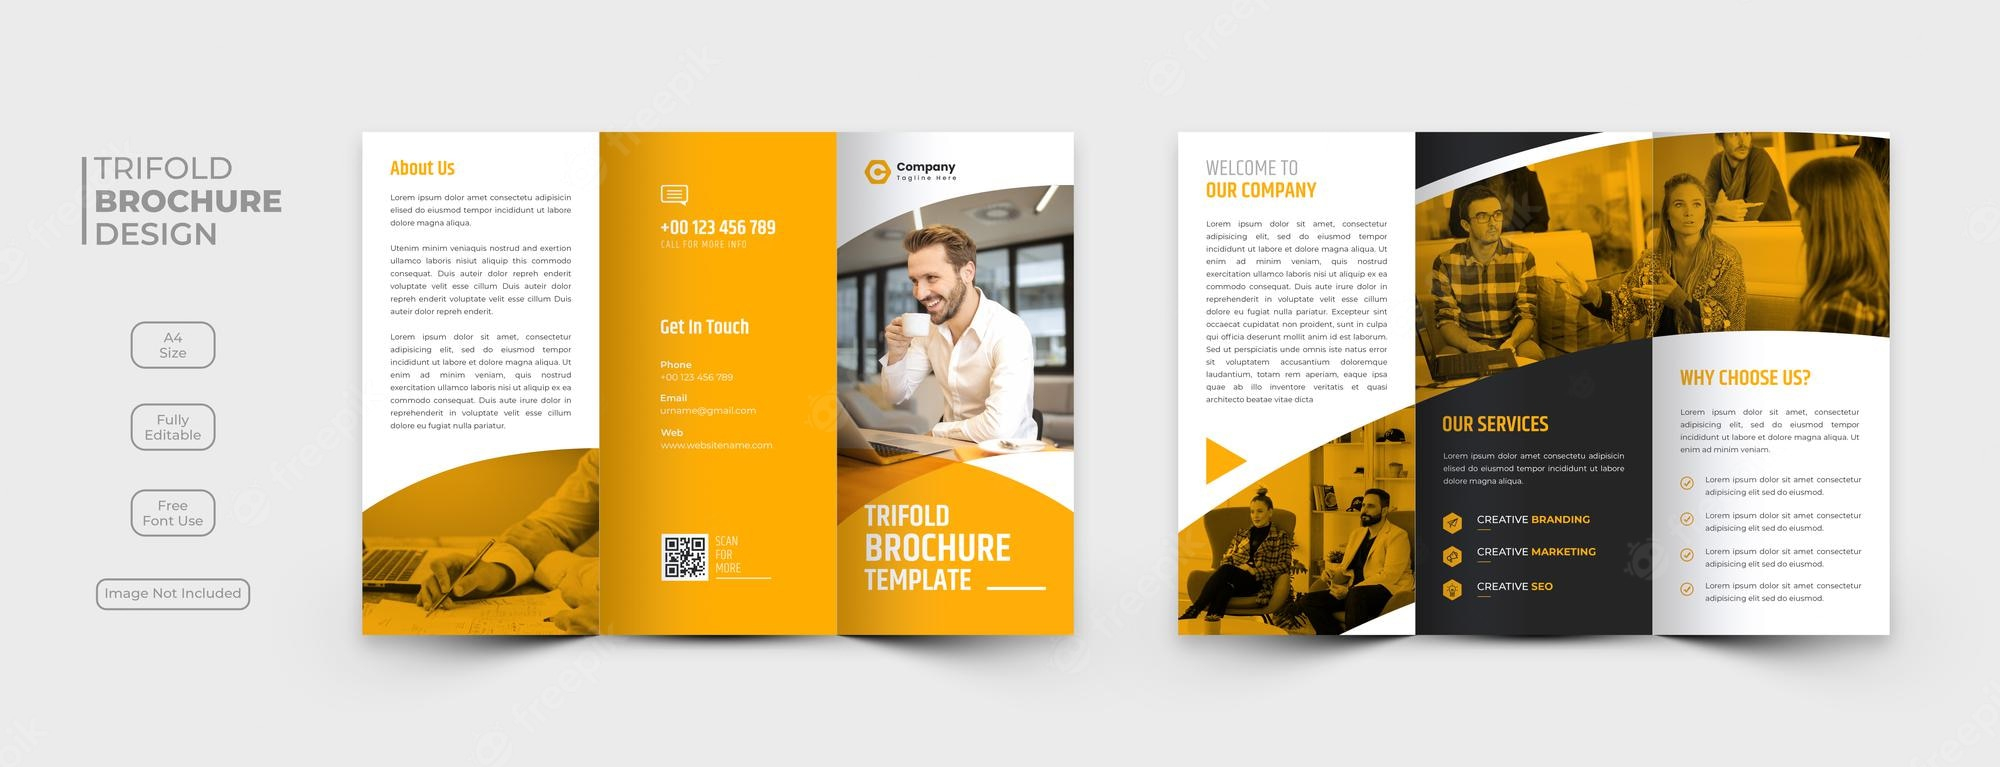 Brochure template - Free Vectors & PSD Download Throughout Free Brochure Templates For Word 2010